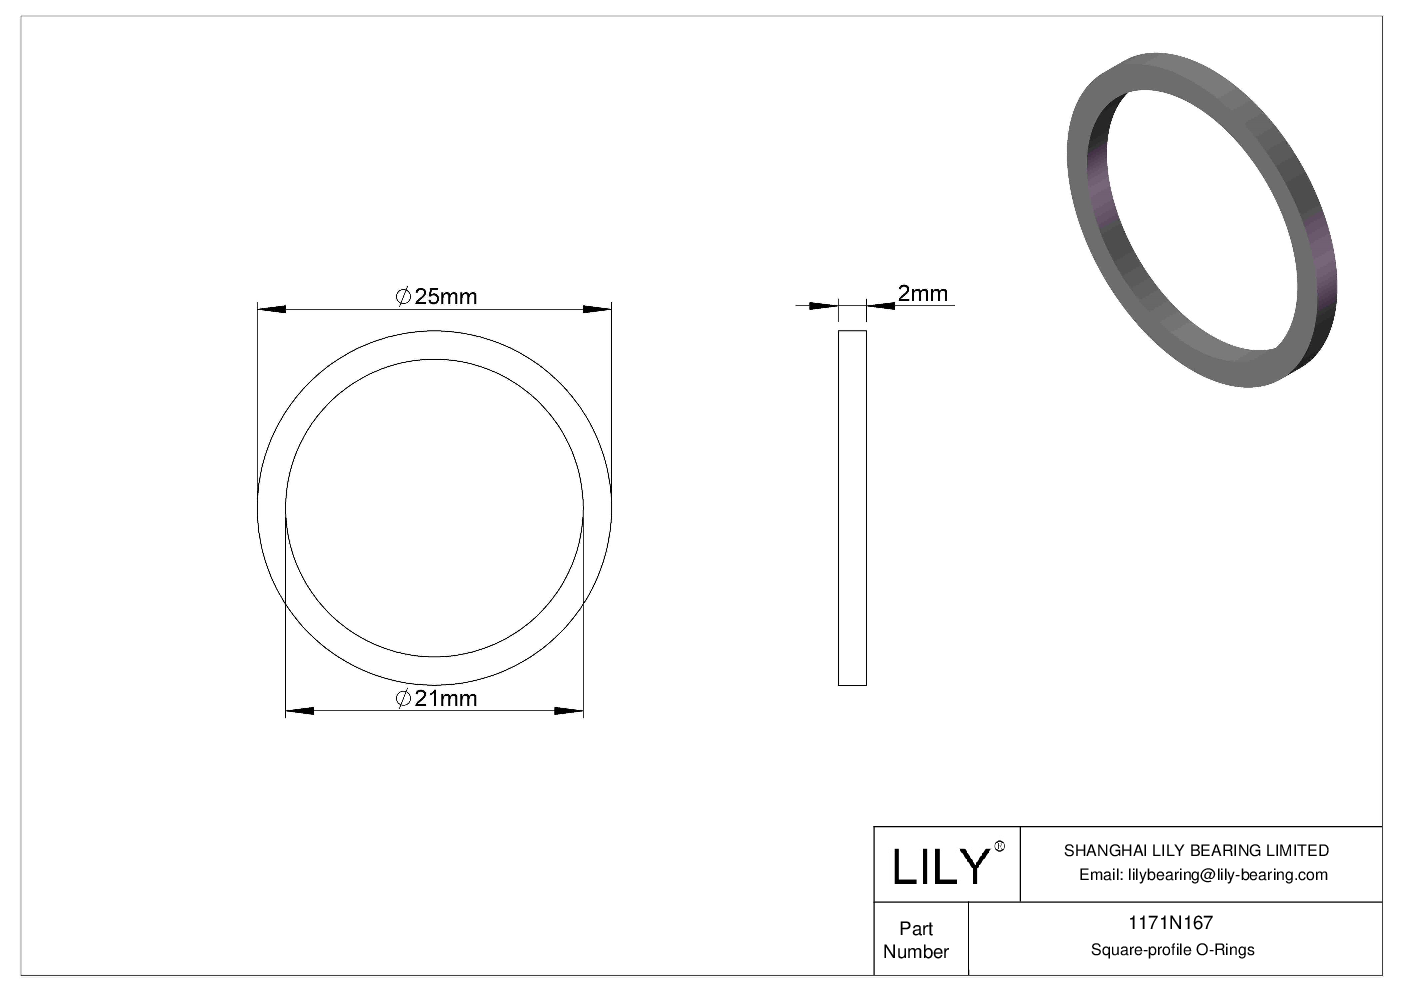 1171N167 Oil Resistant O-Rings Square cad drawing